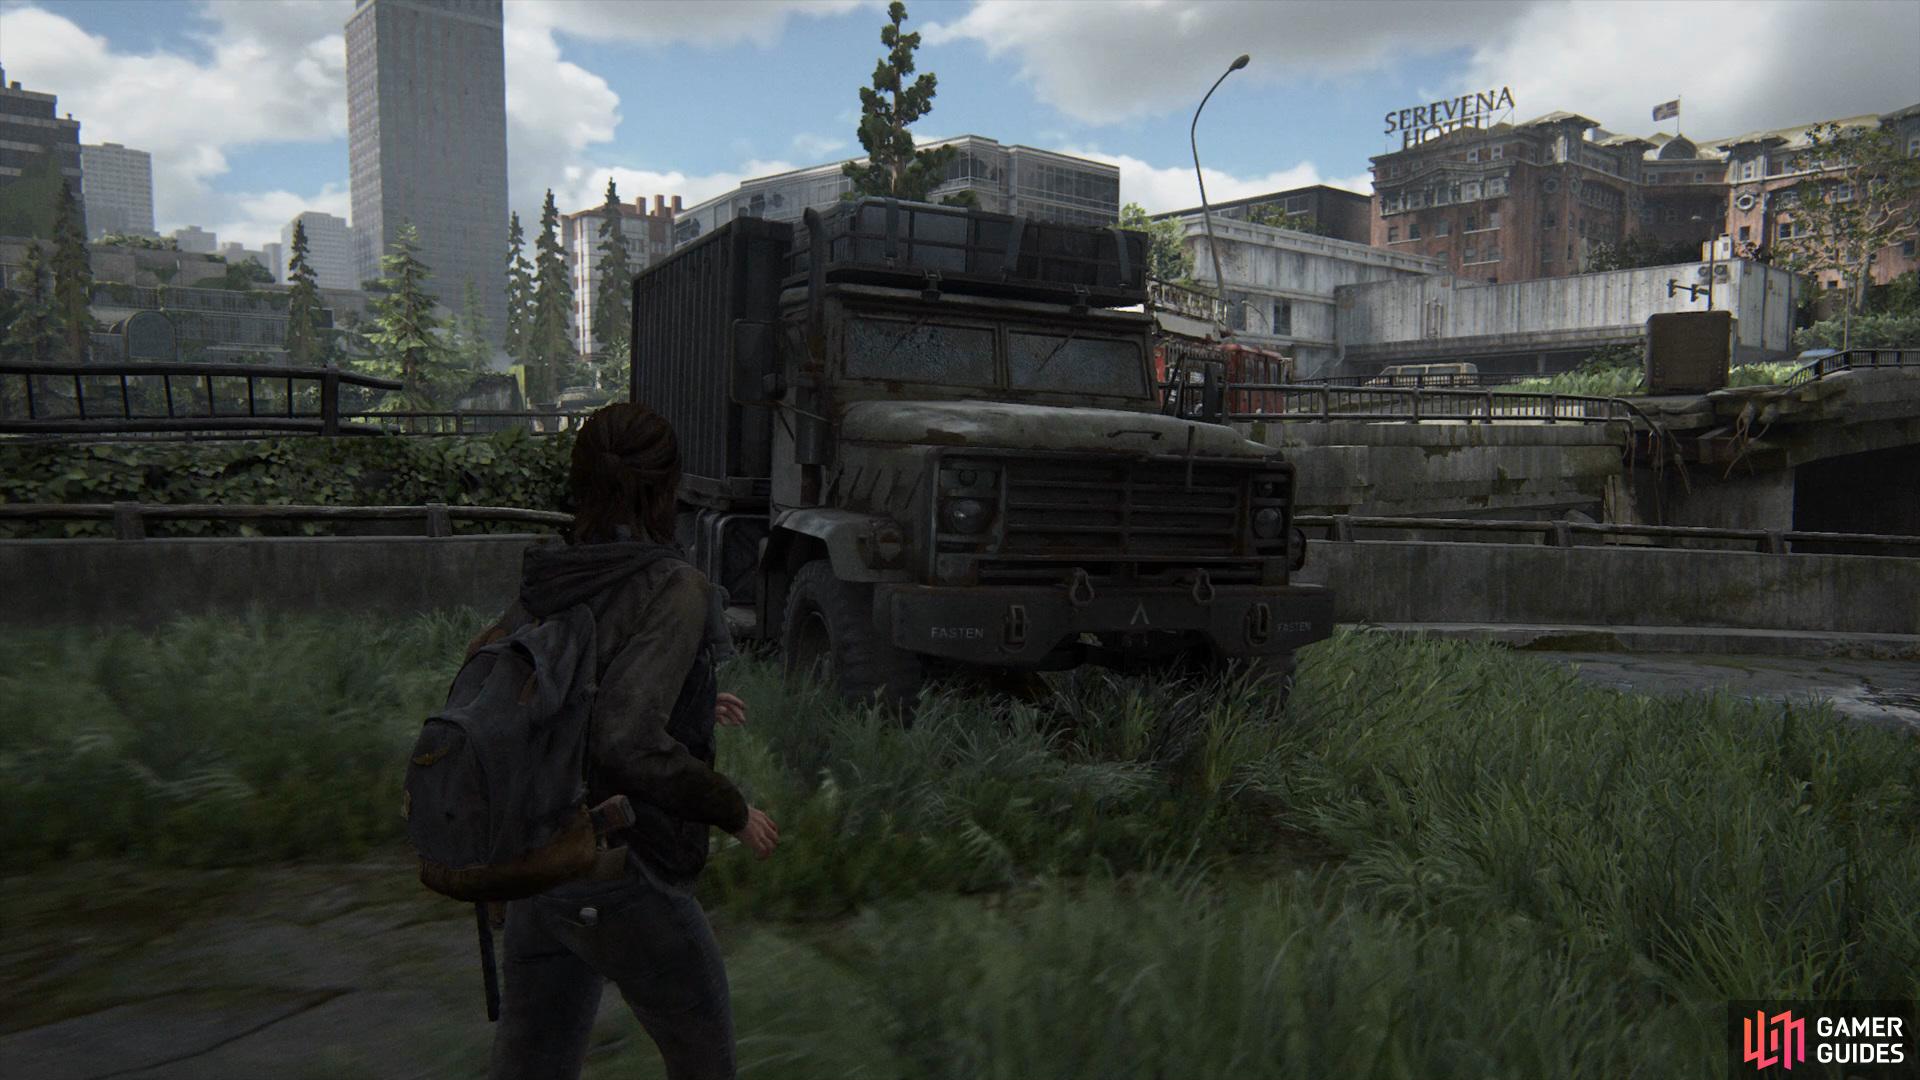 Use the destroyed military truck to reach the fire truck